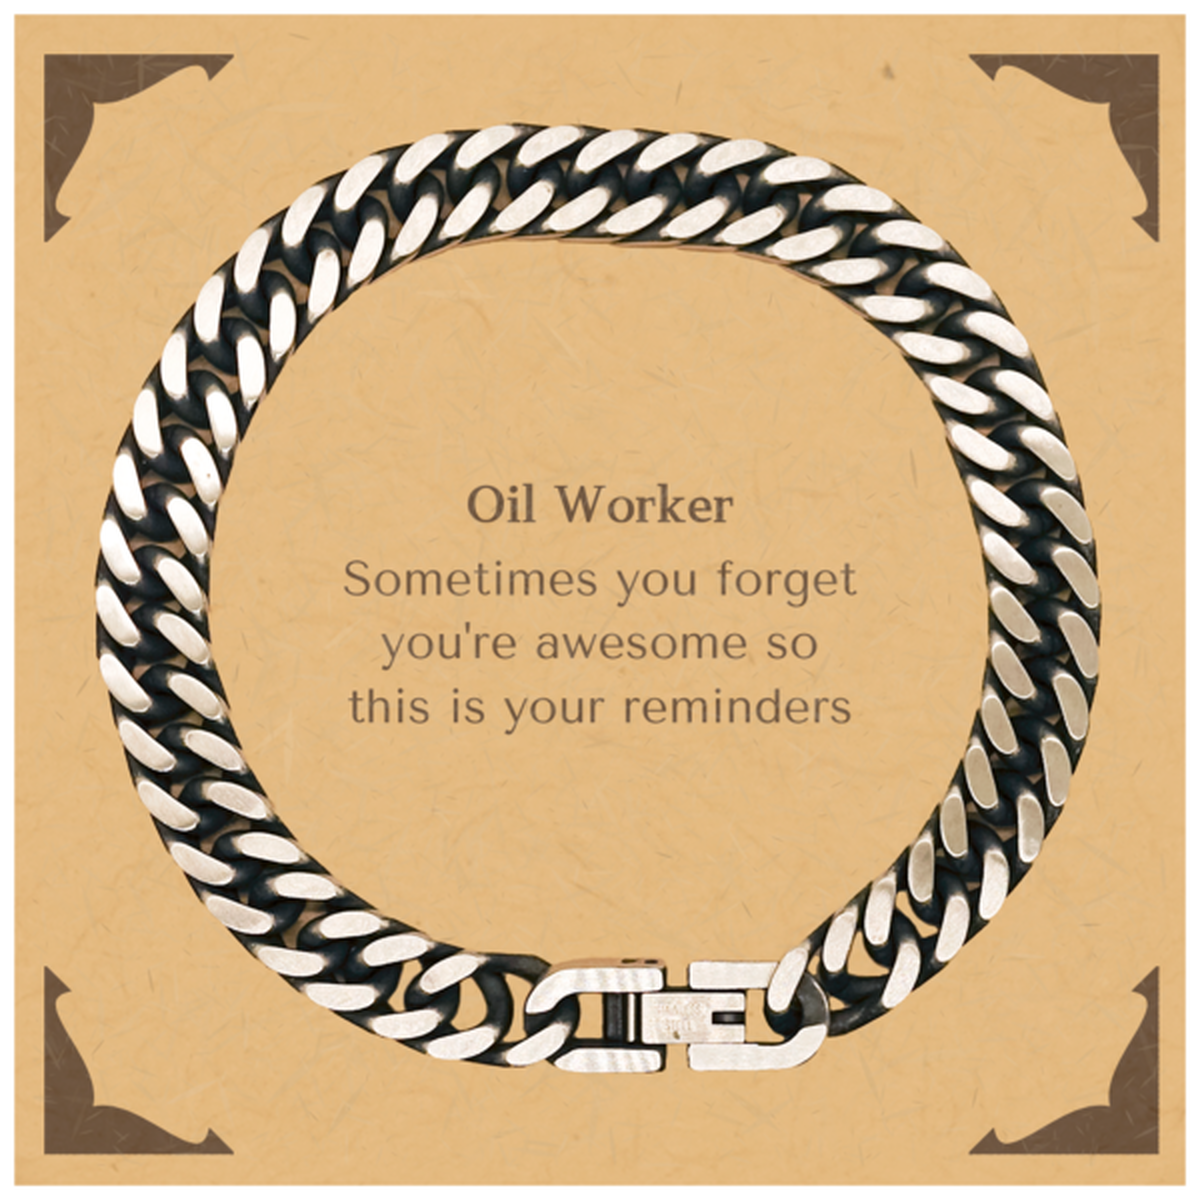 Sentimental Oil Worker Cuban Link Chain Bracelet, Oil Worker Sometimes you forget you're awesome so this is your reminders, Graduation Christmas Birthday Gifts for Oil Worker, Men, Women, Coworkers